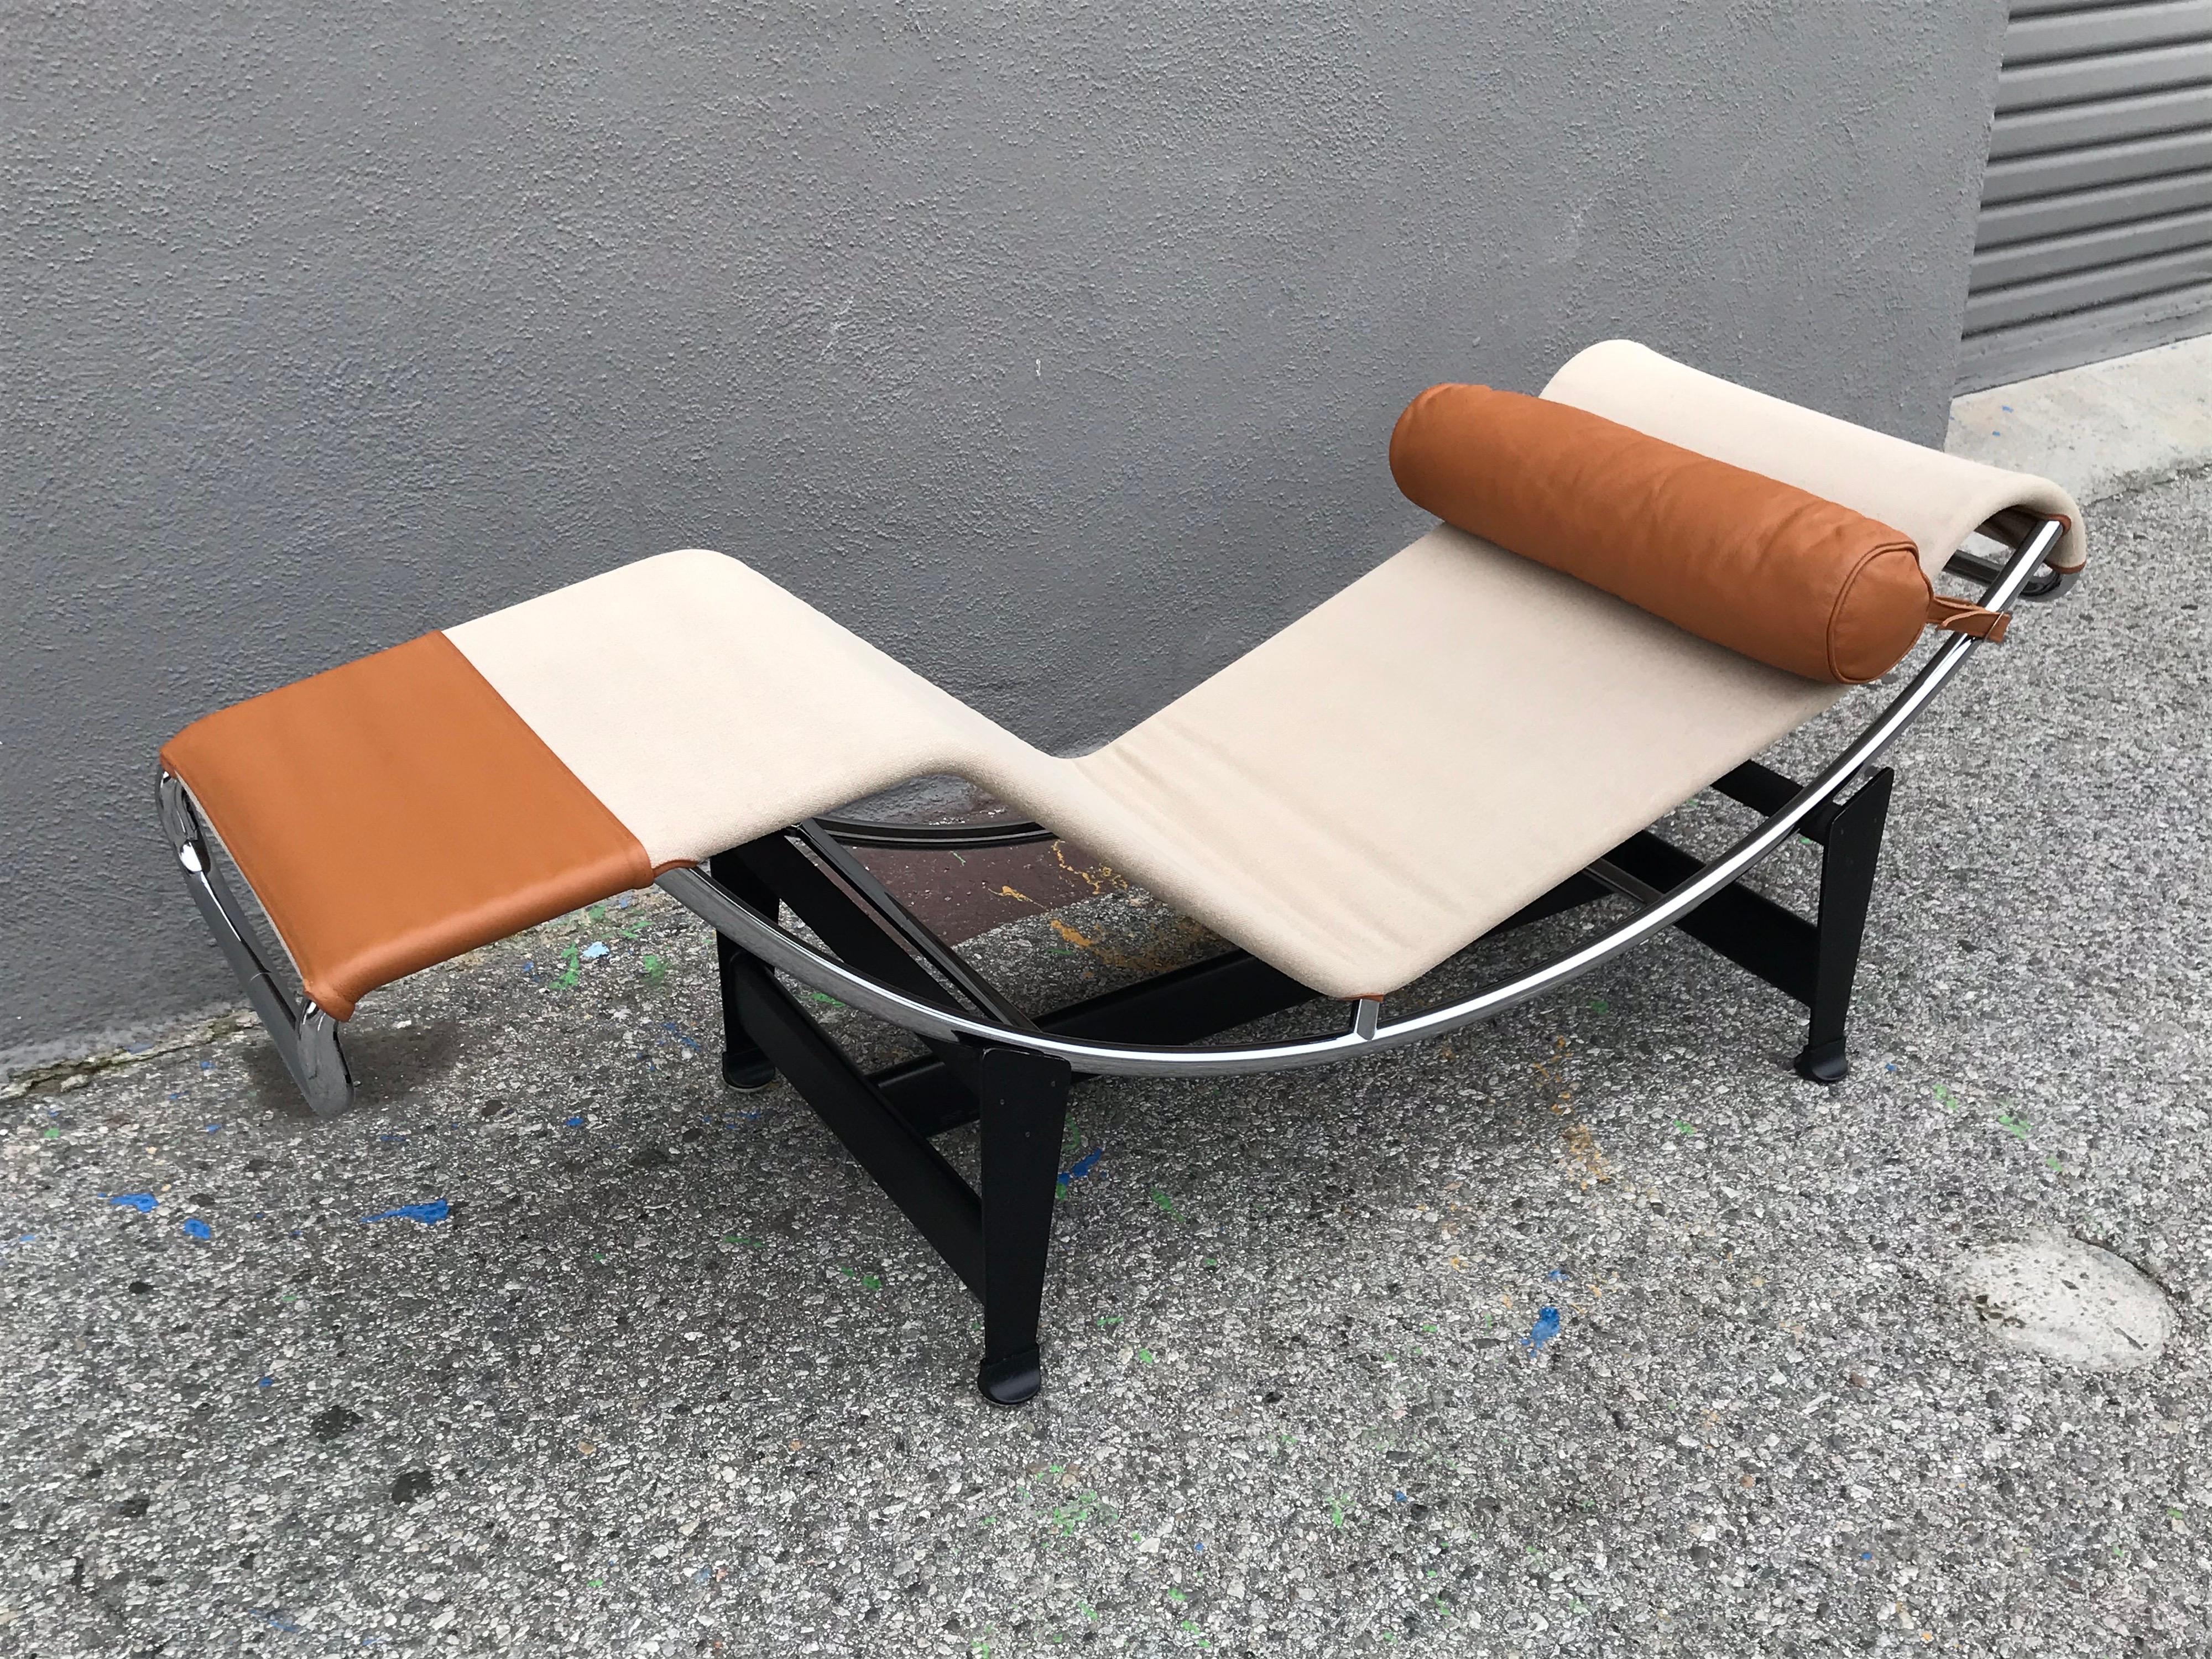 Metalwork Le Corbusier Canvas and Leather Chaise Longue by Cassina